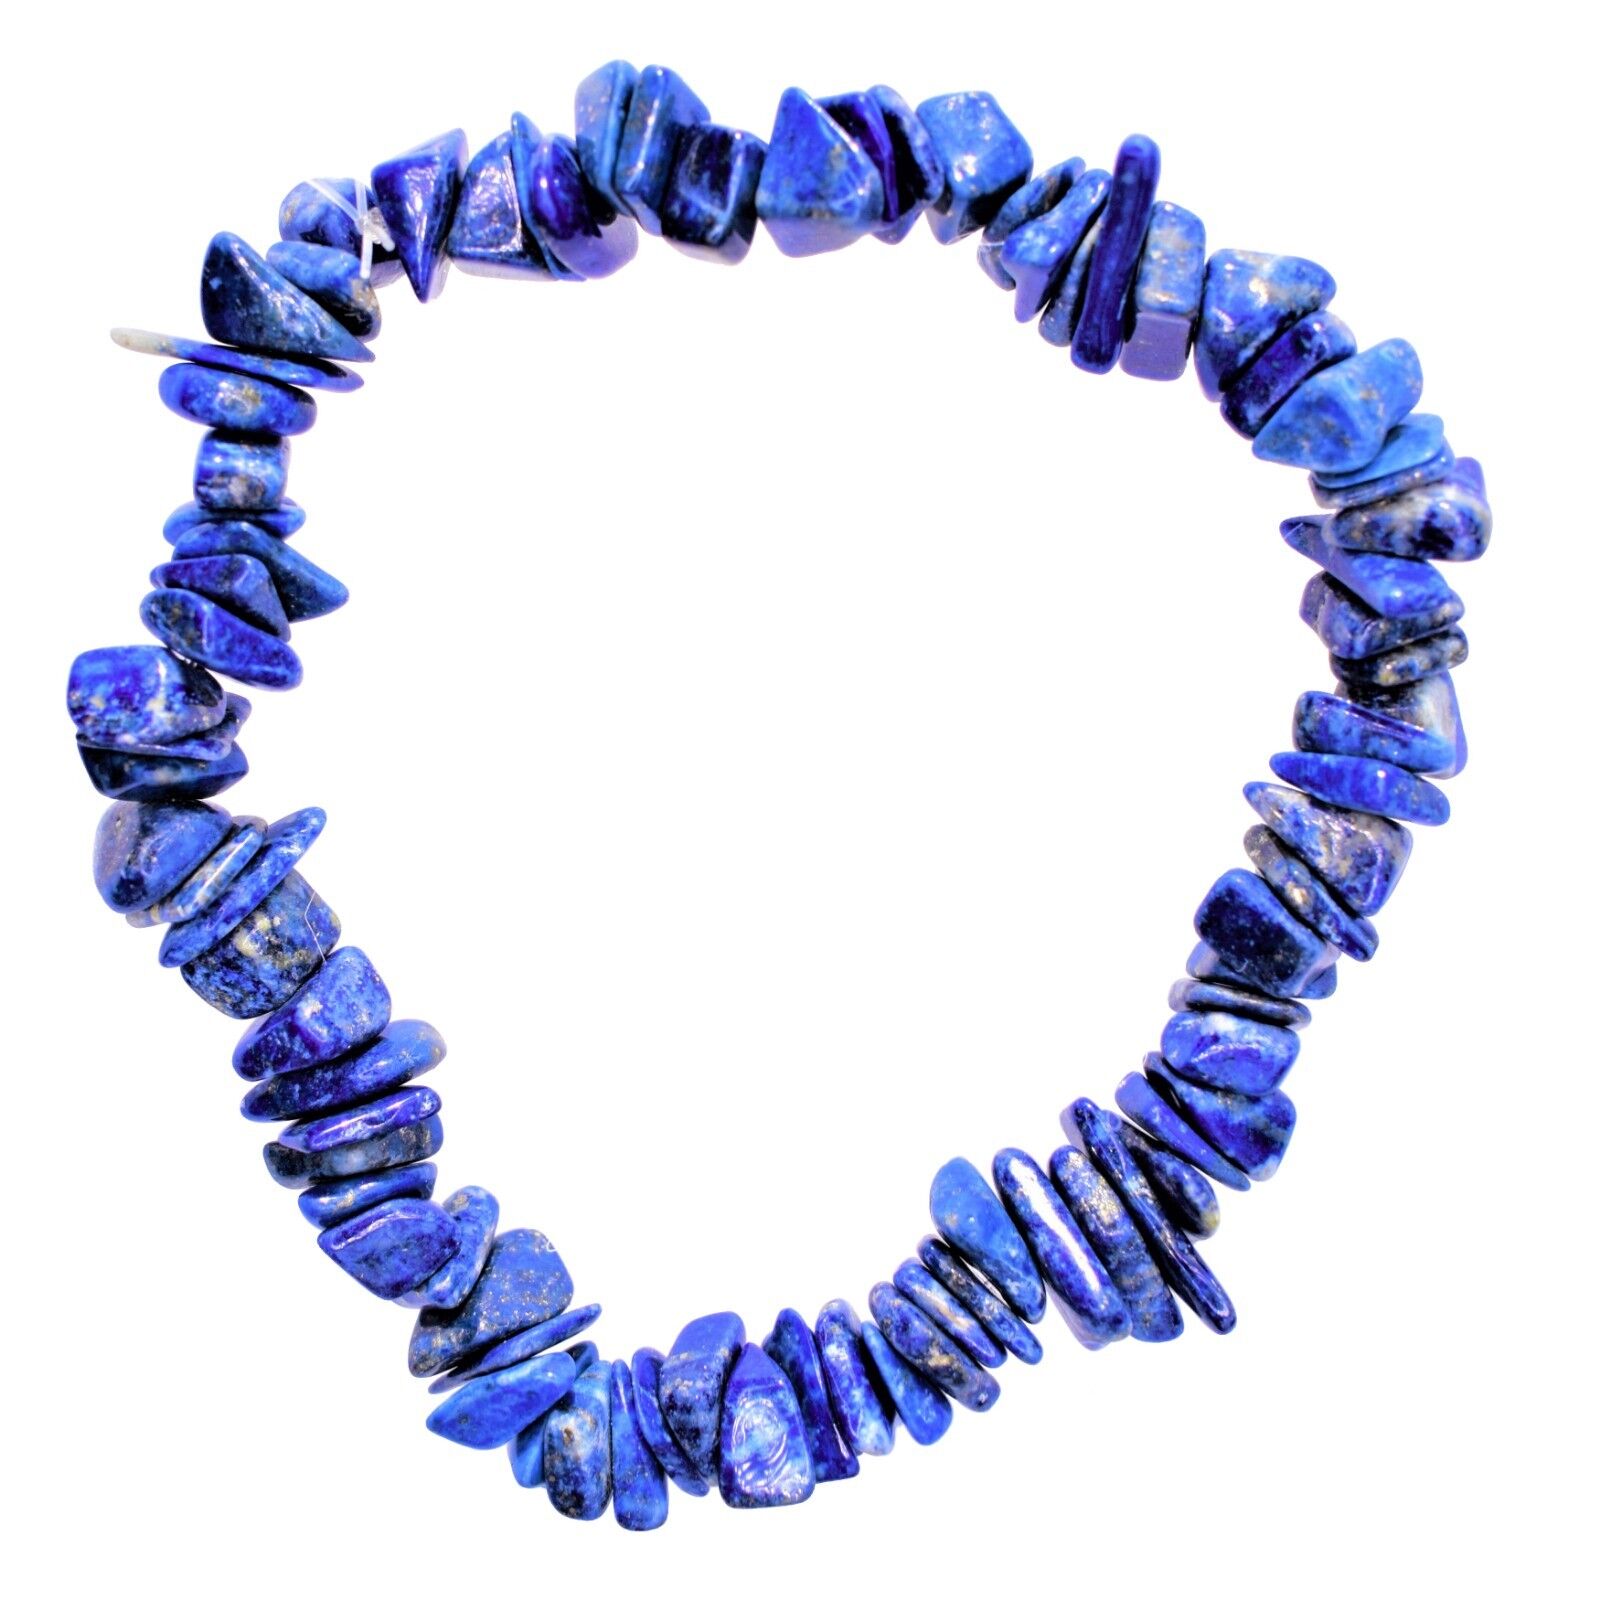 Premium CHARGED Lapis Lazuli Crystal Chip Stretchy Bracelet + Selenite Charger